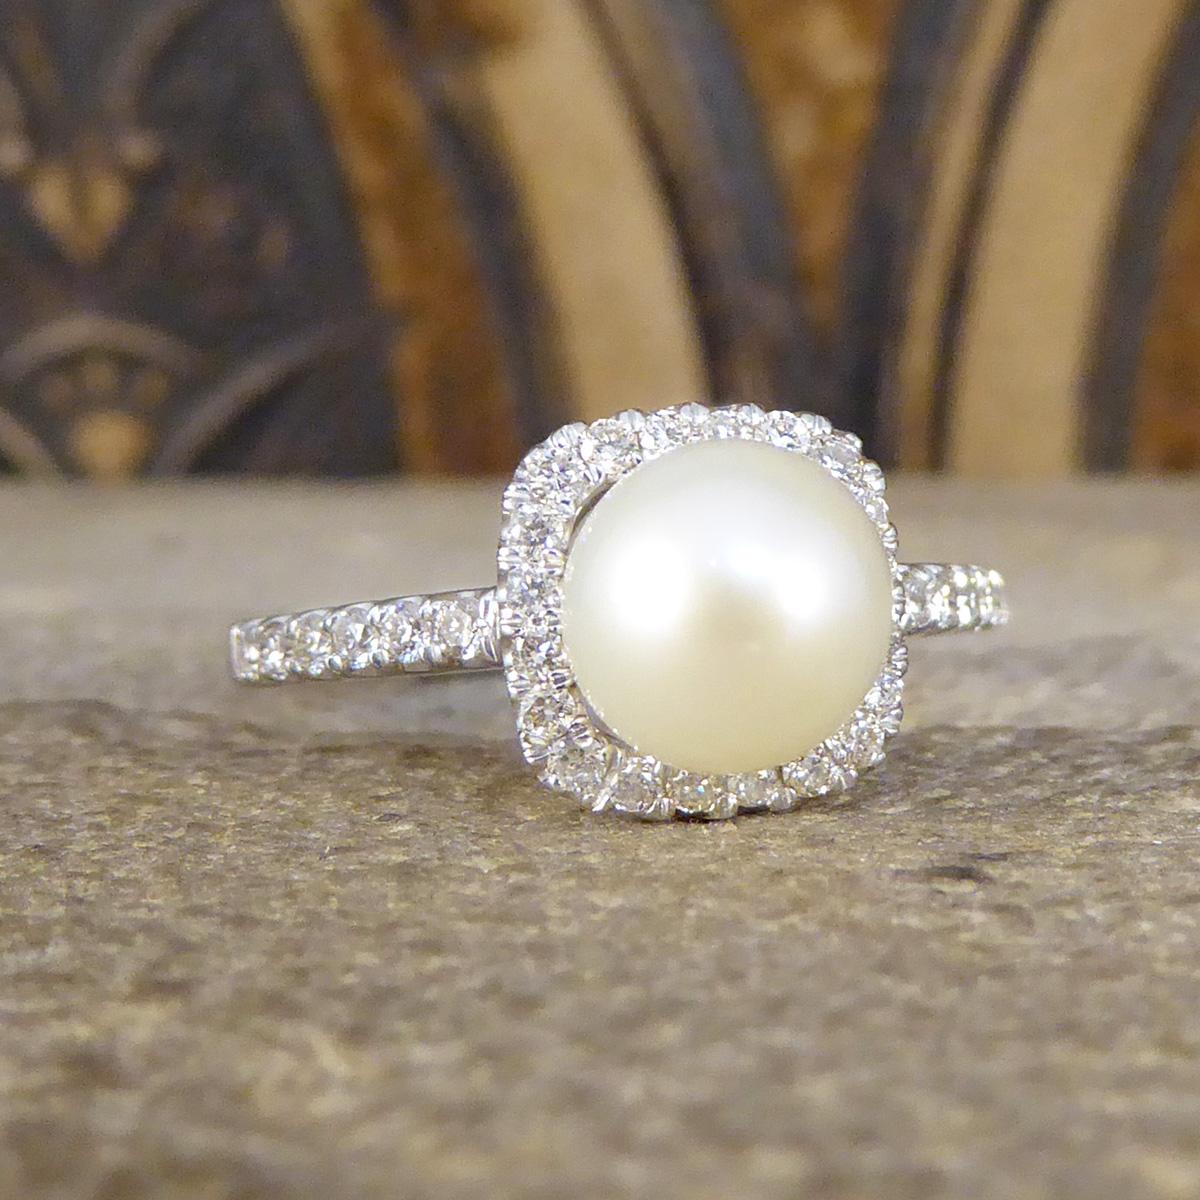 Such a beautiful and dainty ring featuring a Fresh Water Cultured Pearl in the centre with a lovely lustre. Surrounding a gracefully cream centre is a square shaped halo of small and sparkly Diamonds set around the Pearl and down each shoulder